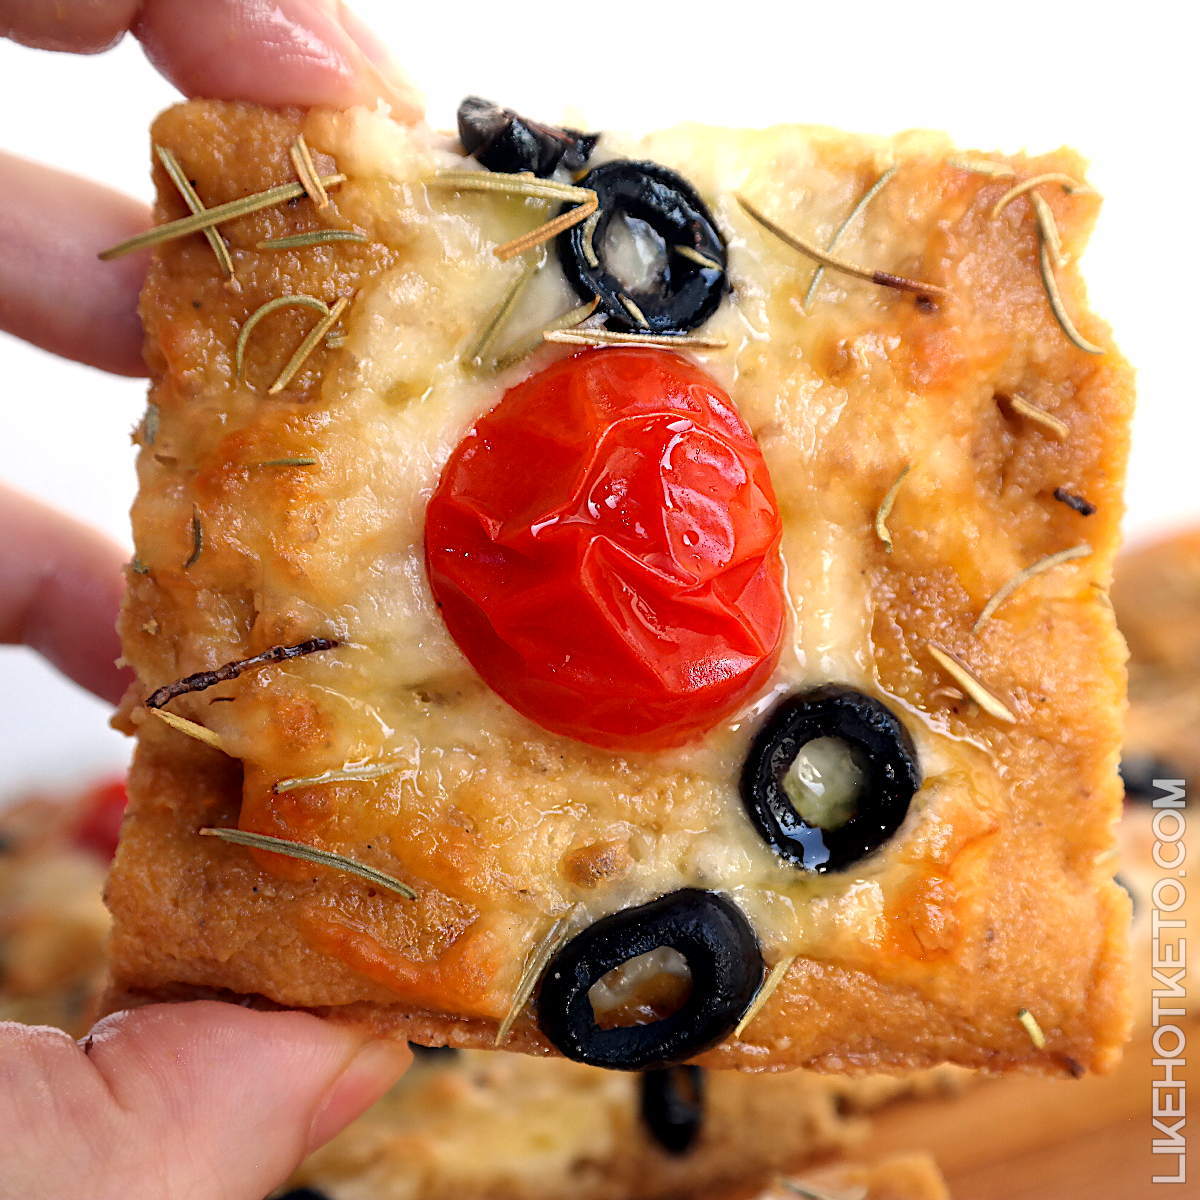 A slice of low-carb Italian focaccia with baked heirloom tomato.